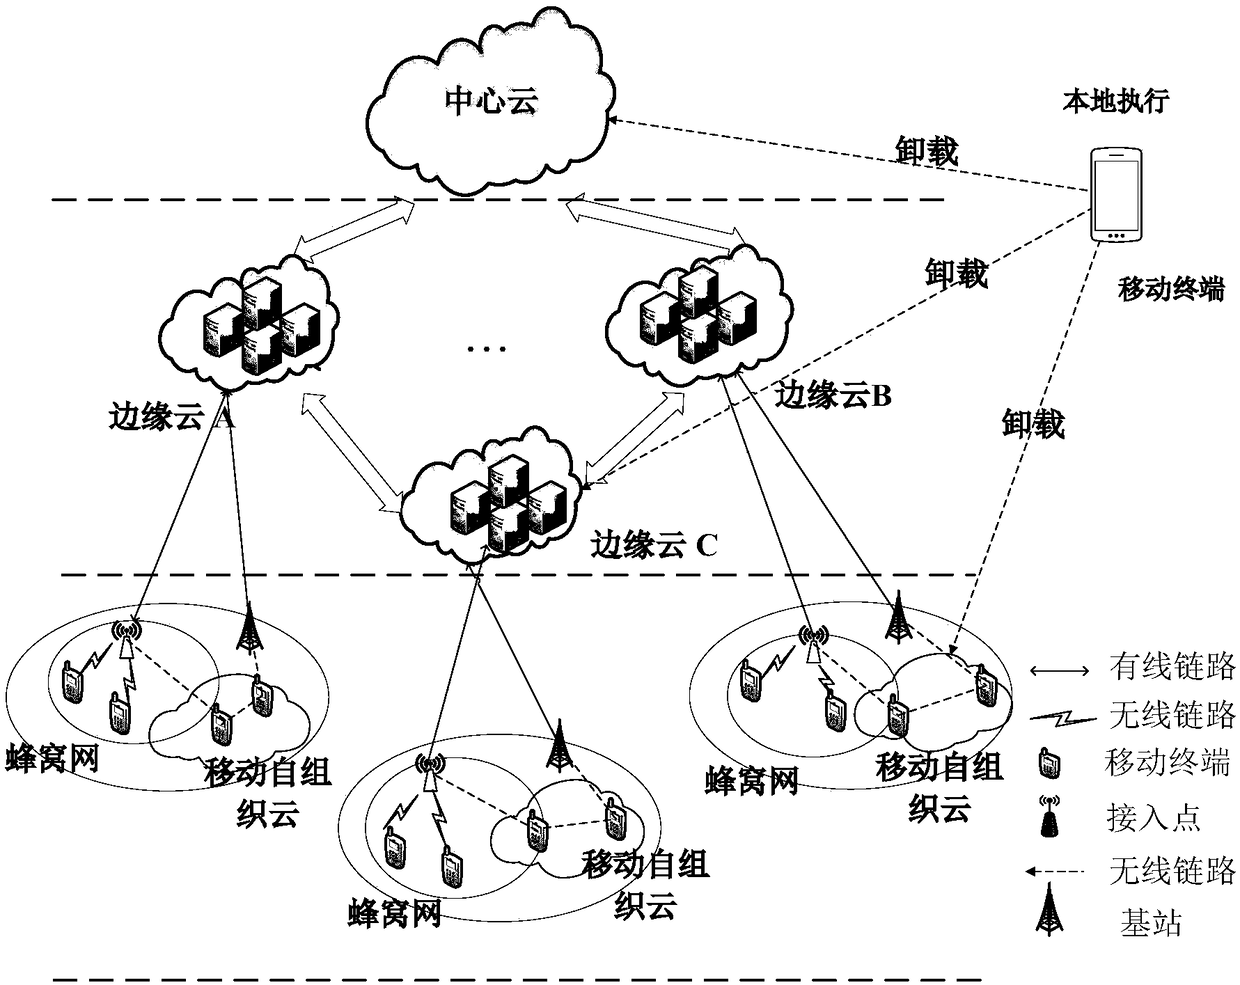 Cooperative unloading method based on Markov decision process in mobile cloud computing system